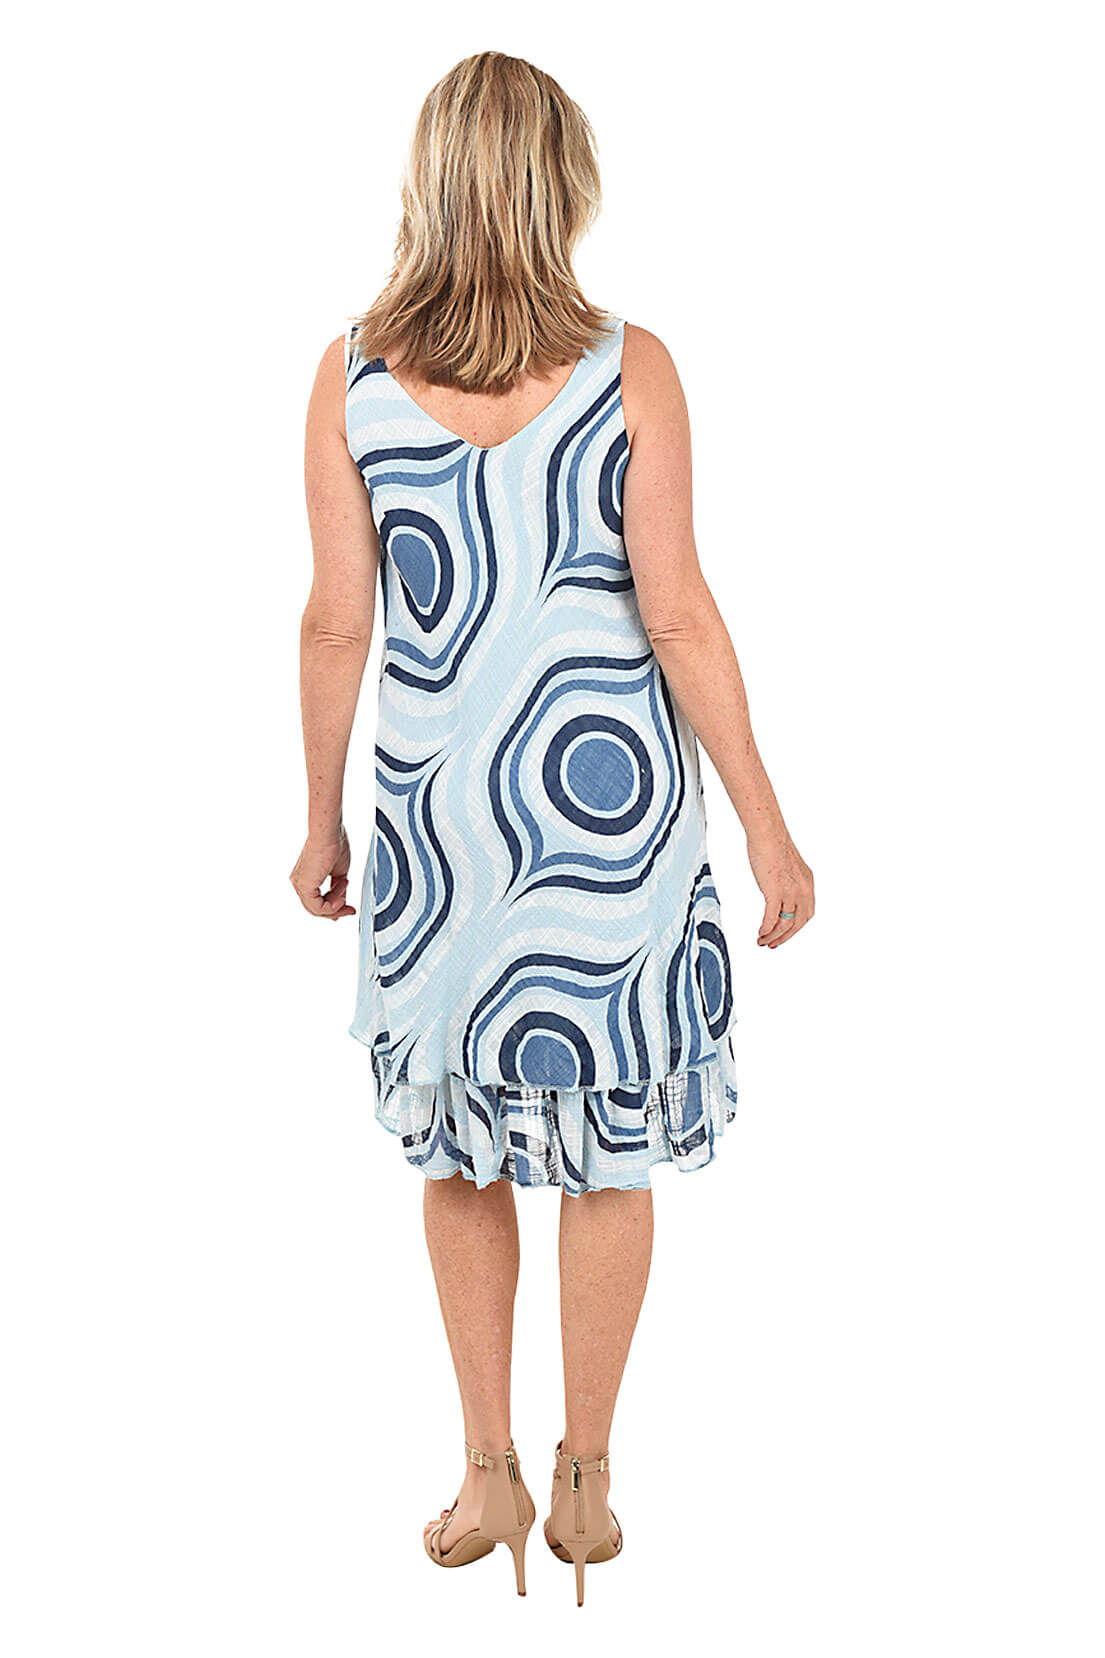 Concentric Circles Double Layer Tank Dress